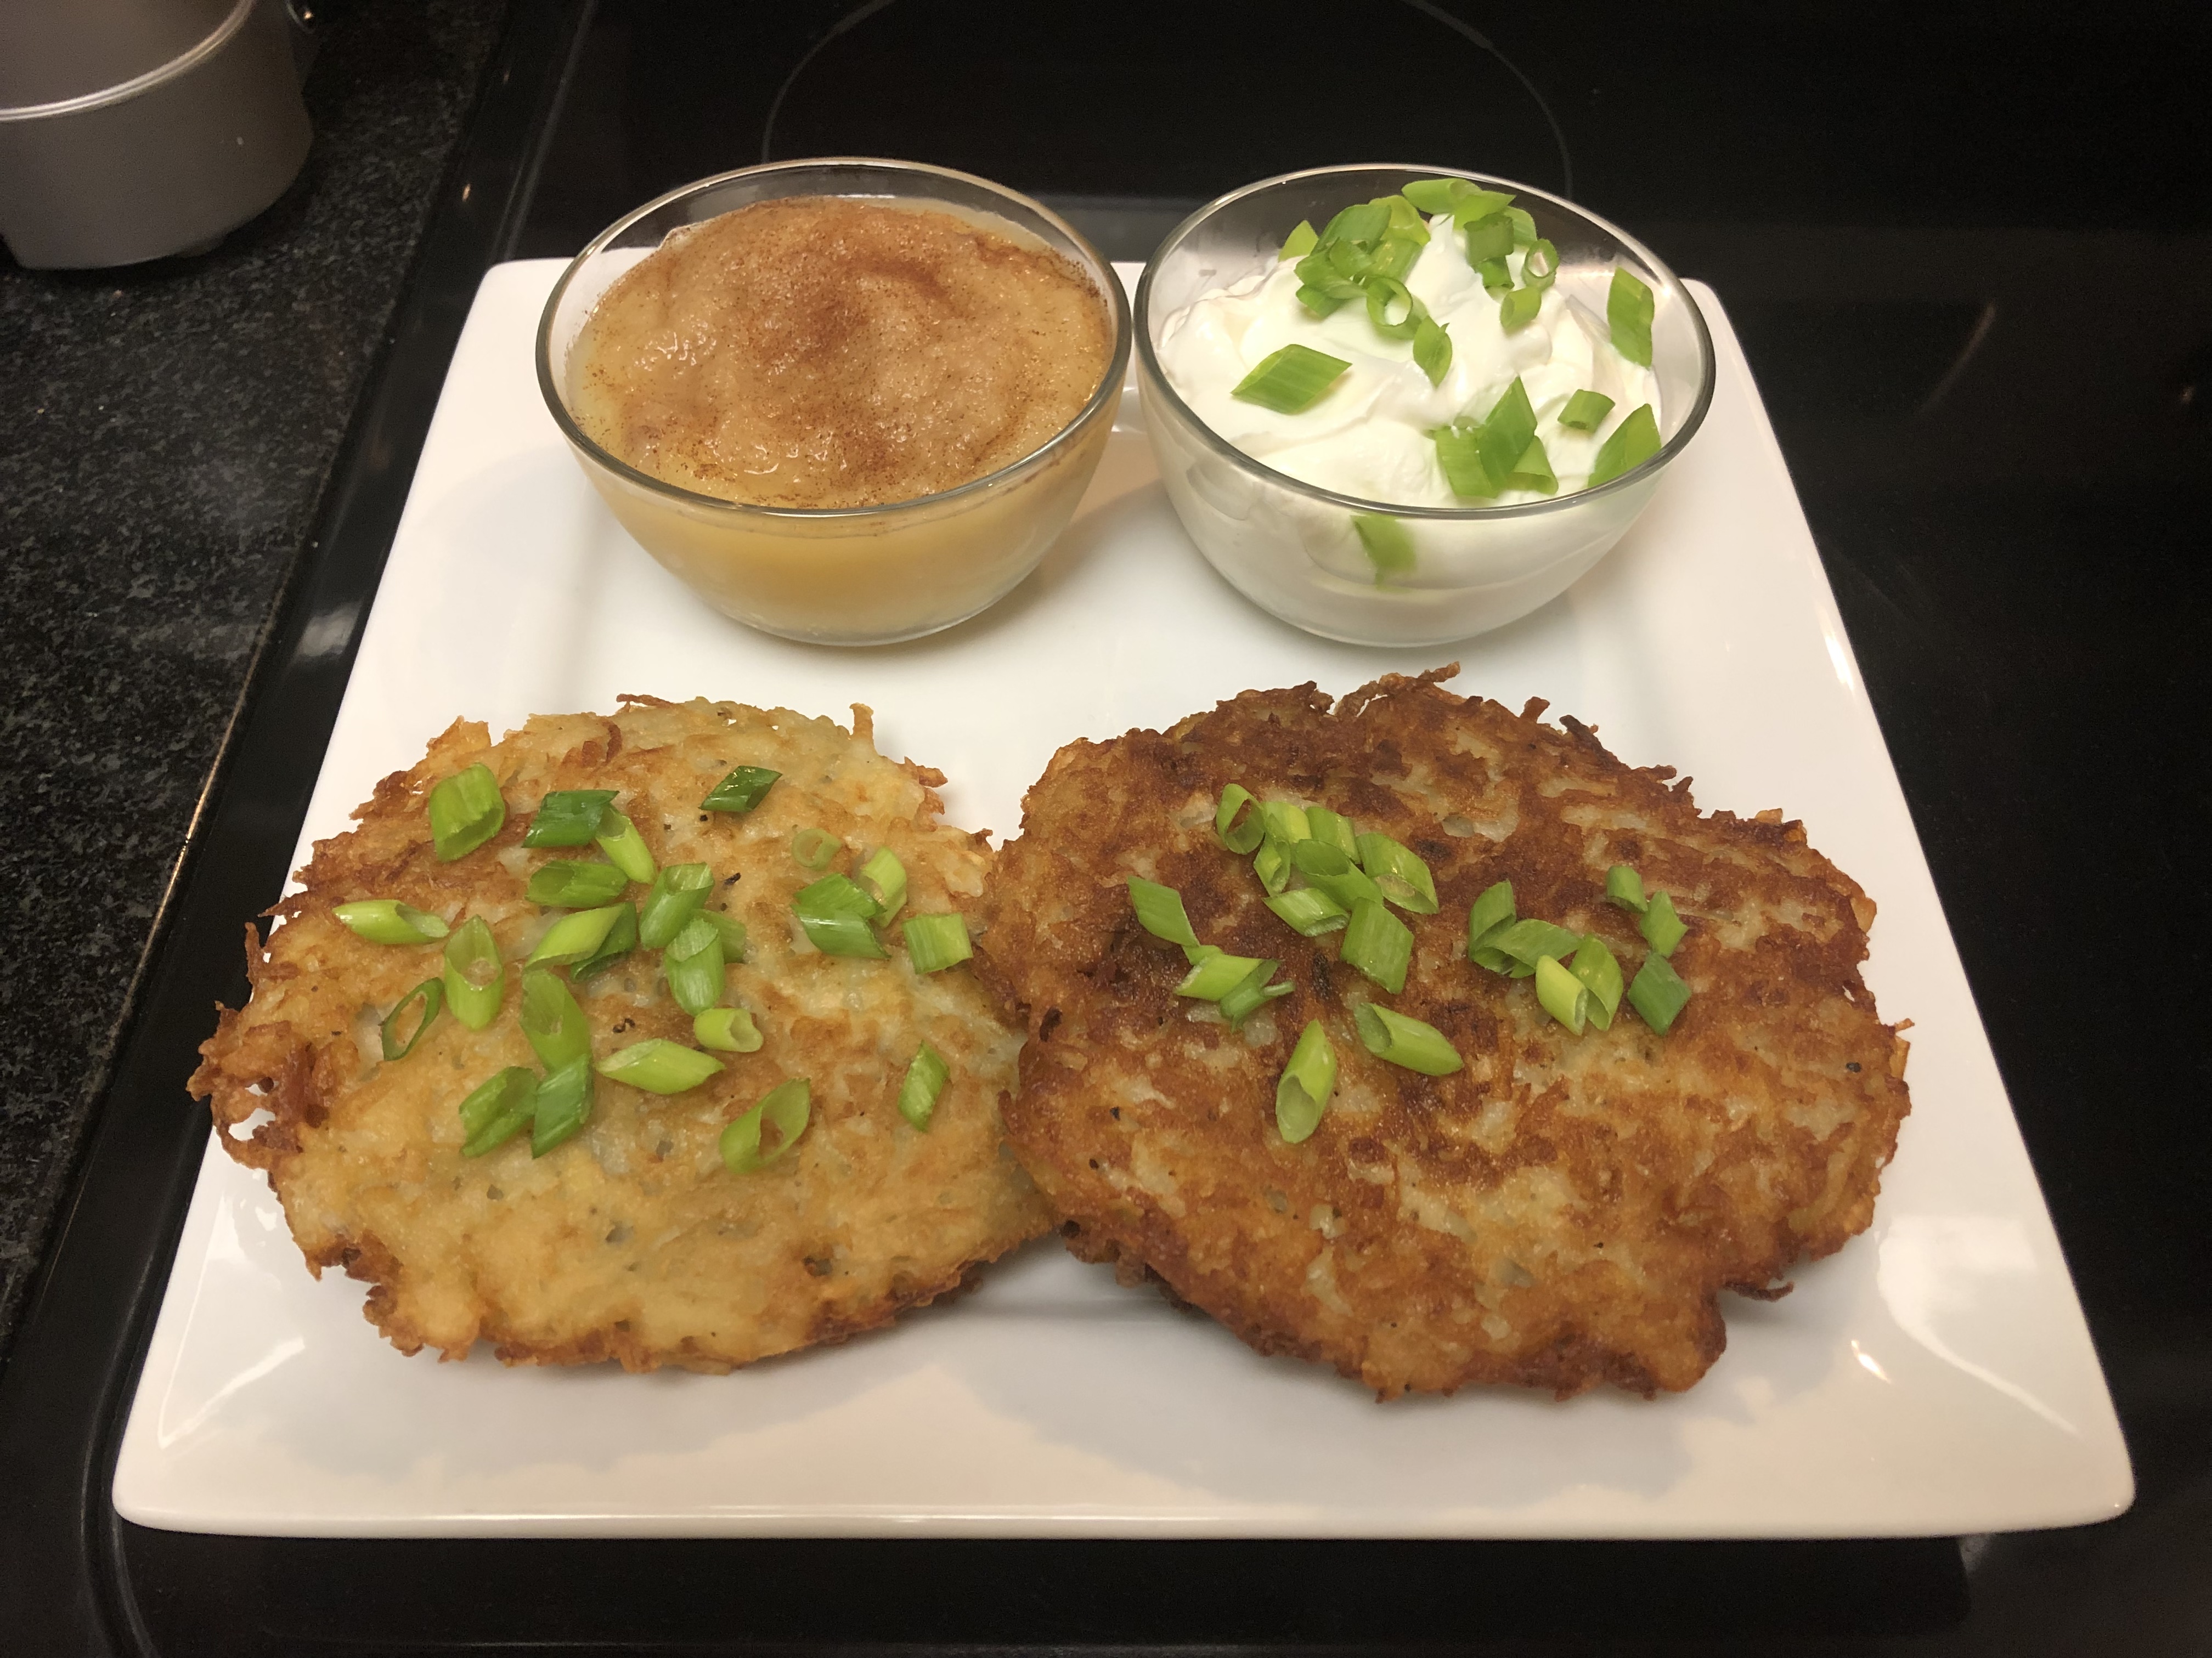 Potato pancakes plated and garnished with green onions with side bowls of garnished apple sauce and sour cream